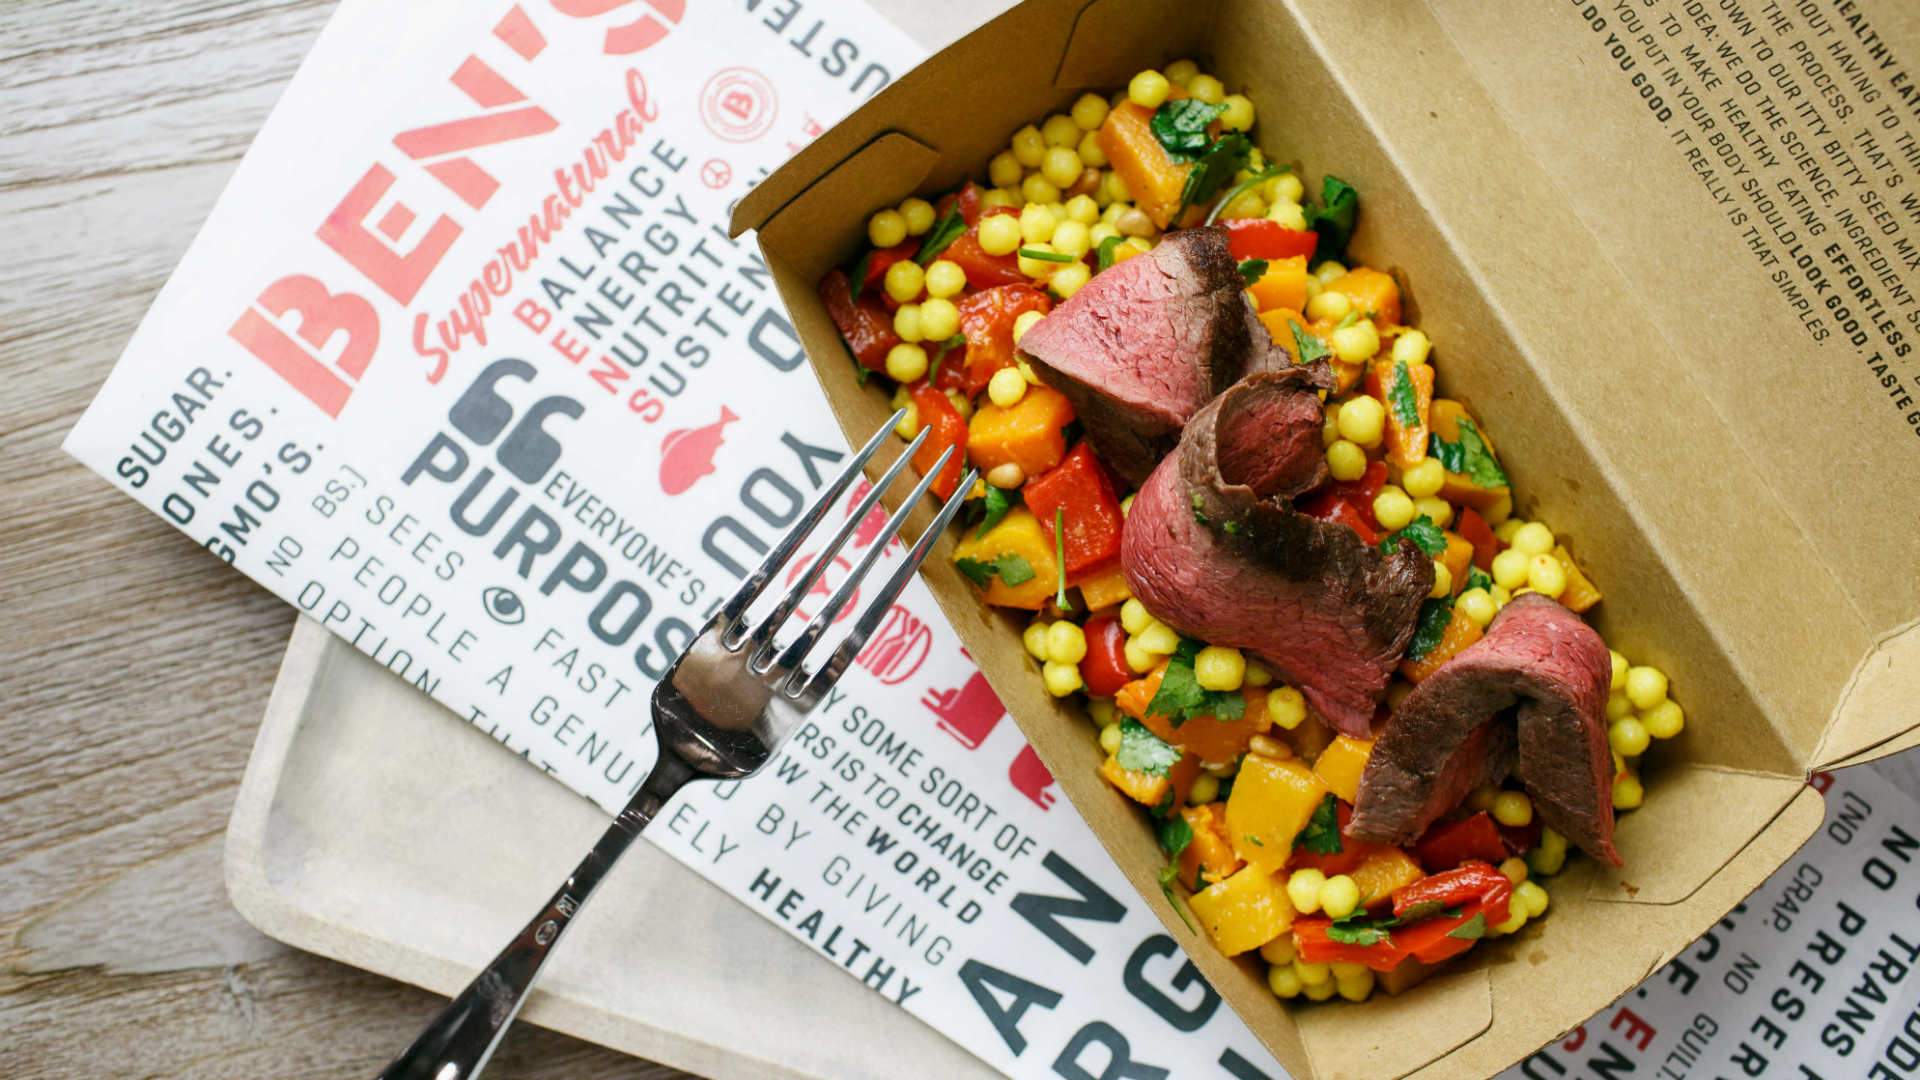 Melbourne's Chapel Street Has a New 'Healthy' Fast Food Joint